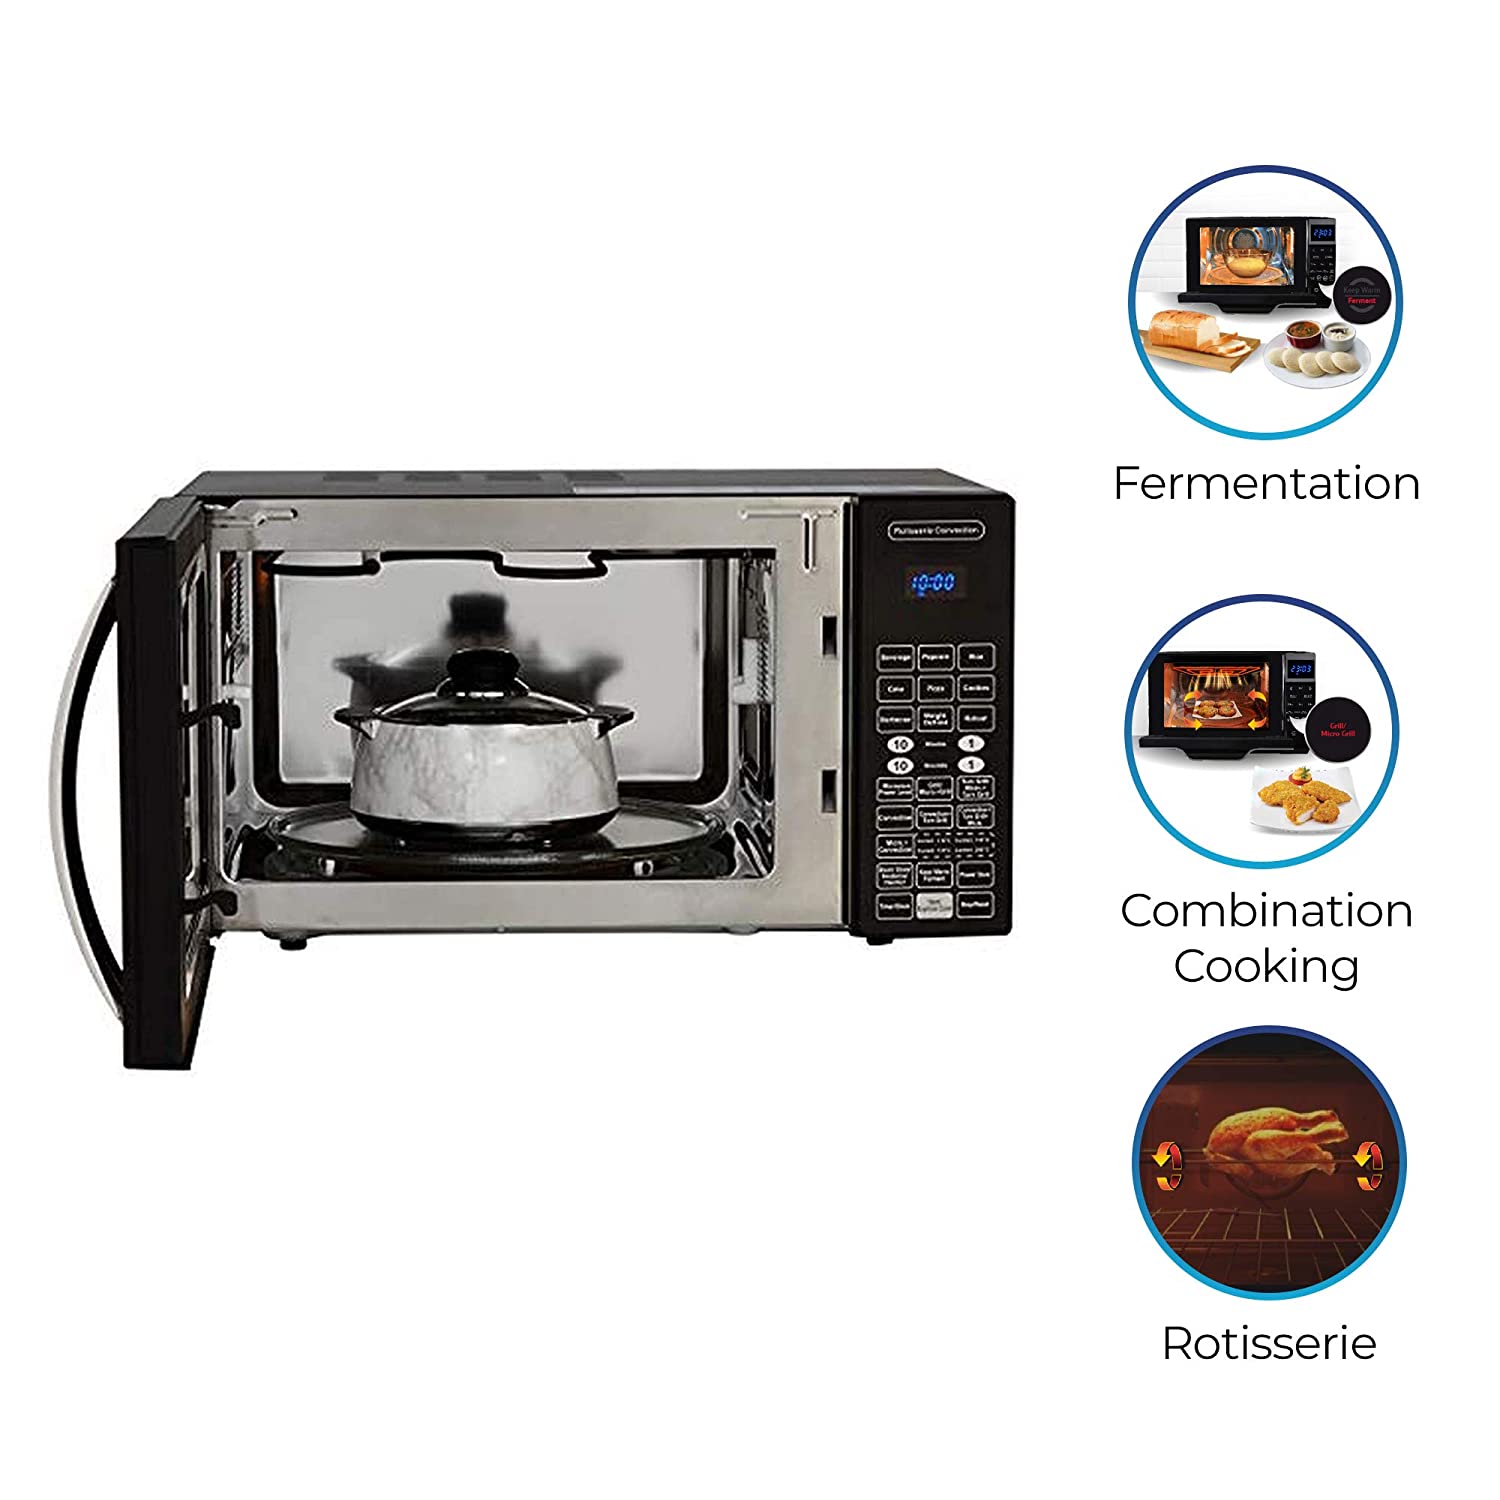 IFB 30 L Convection Microwave Oven (30FRC2, Floral Pattern) (Black), STANDARD